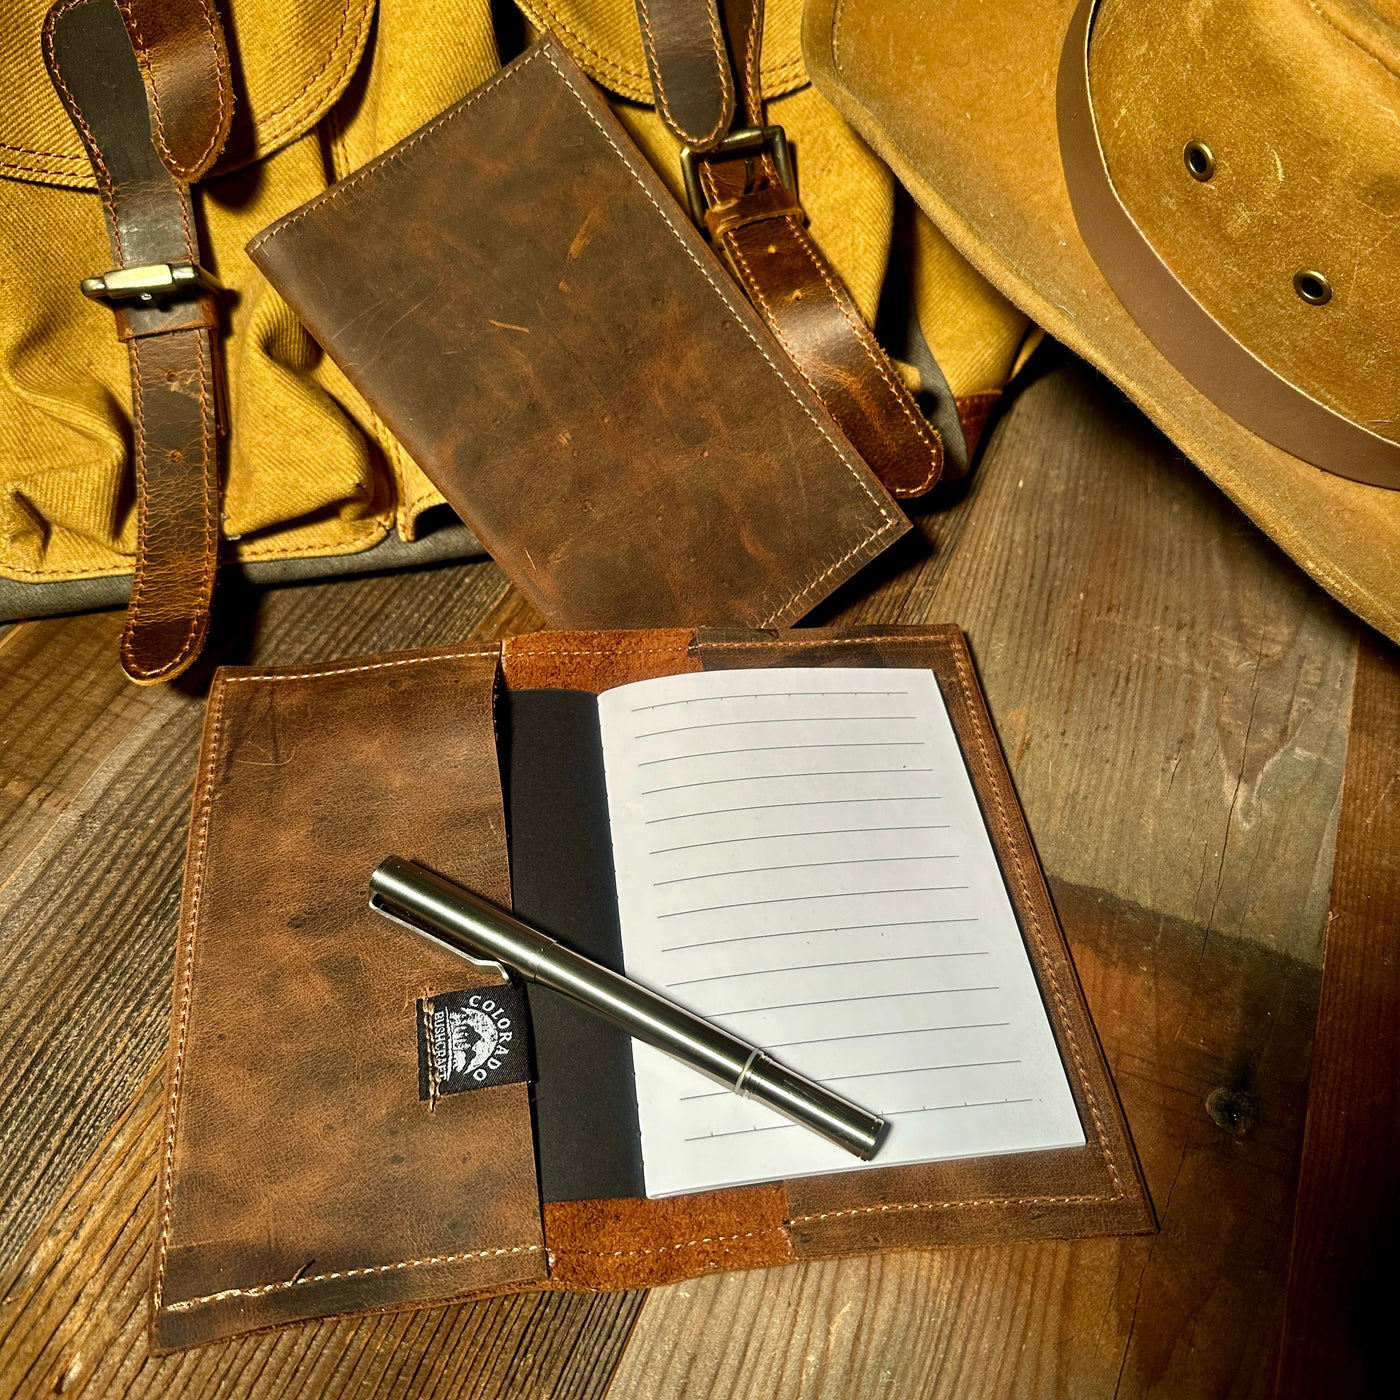 Handmade Bushcraft Field Note Rustic Denver Tanned Leather Notebook Diary (Includes Notebook)